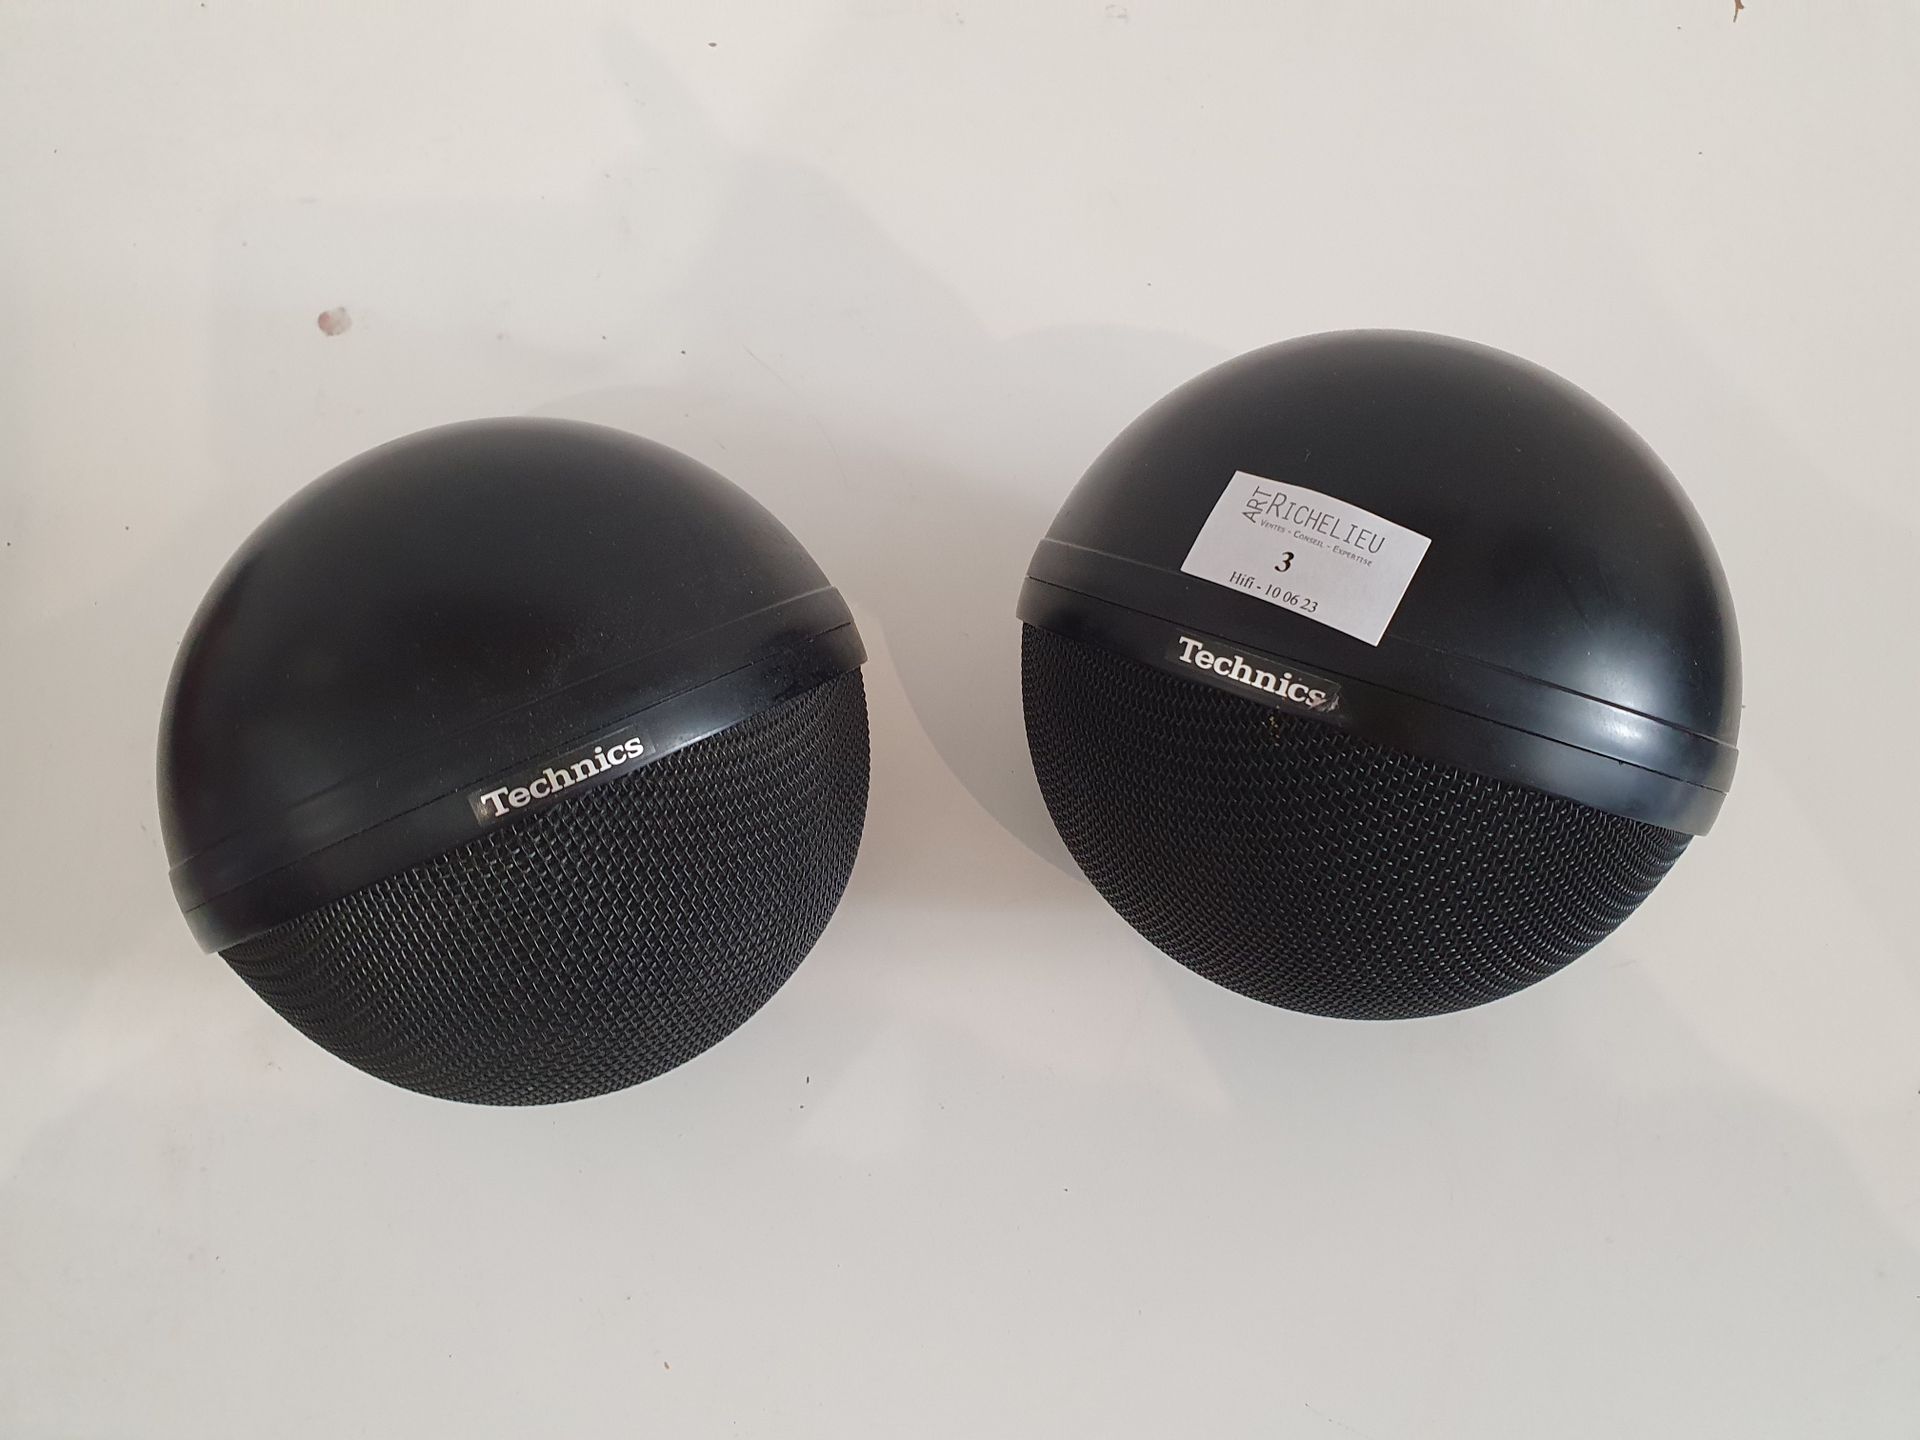 Null Pair of ball speakers, TECHNICS, SB 830A
Good cosmetic condition, working
W&hellip;